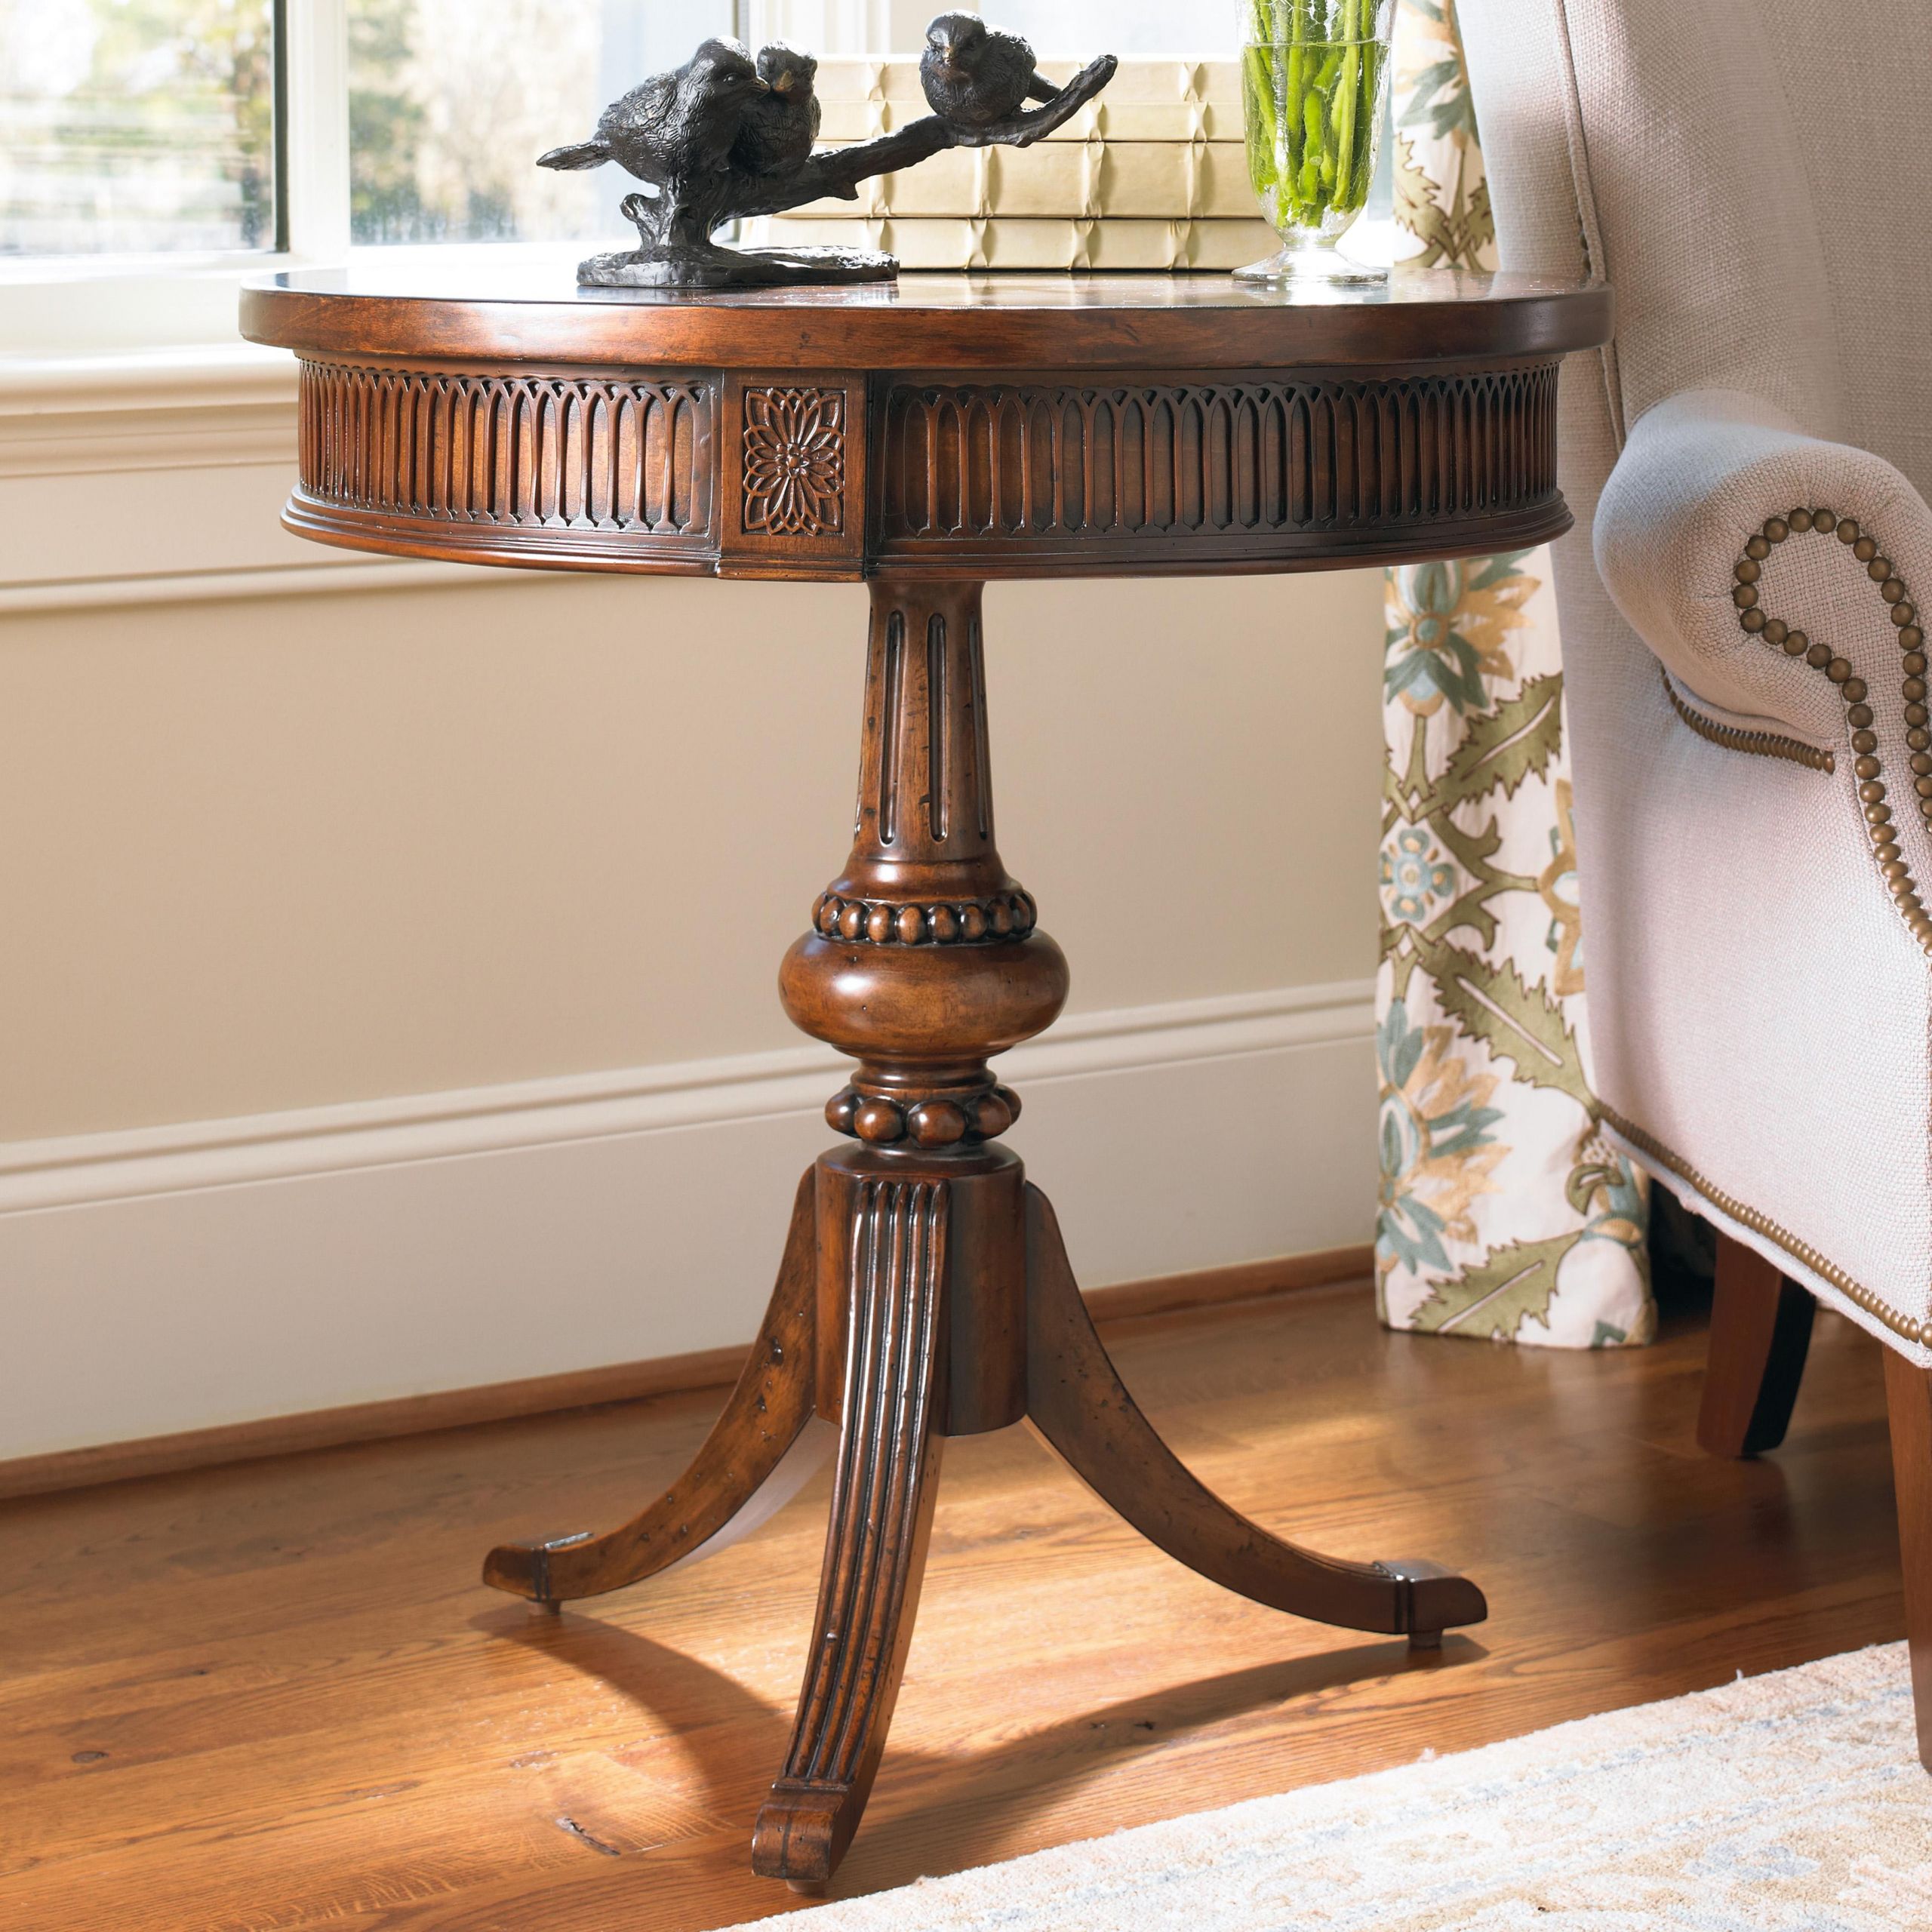 Side Tables Living Room
 Hooker Furniture Living Room Accents Round Accent Table